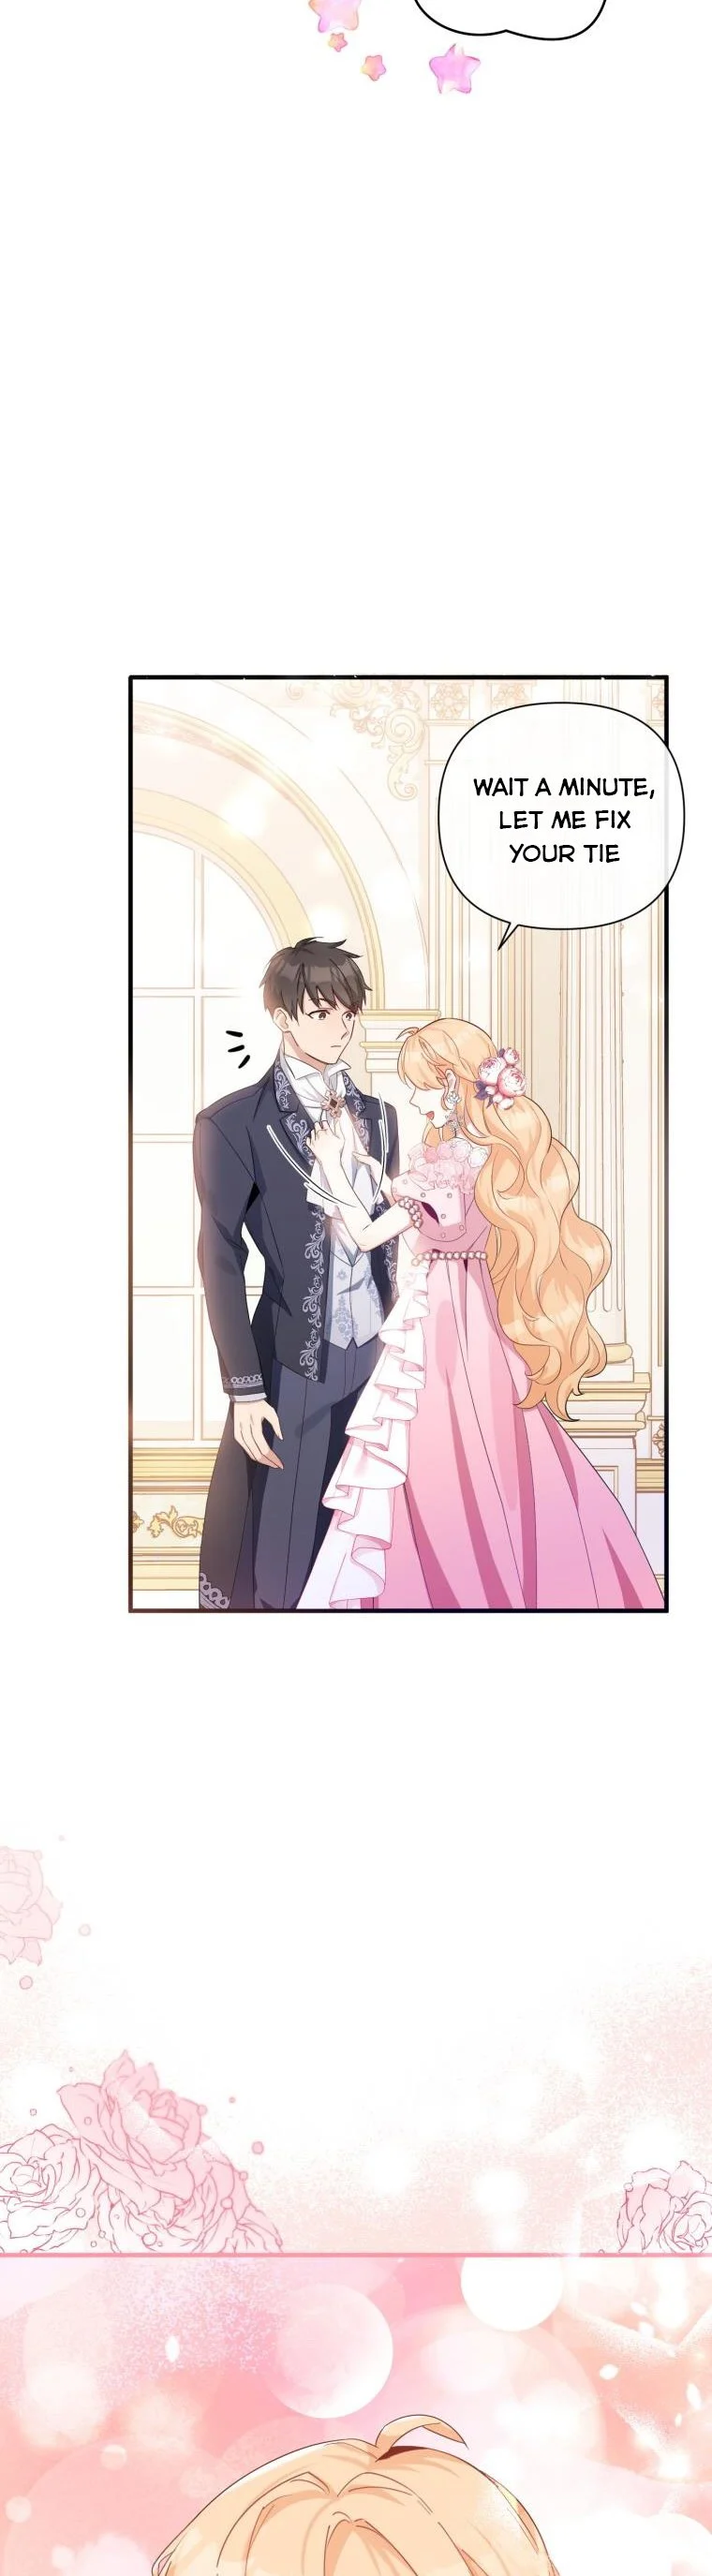 Marriage B chapter 33